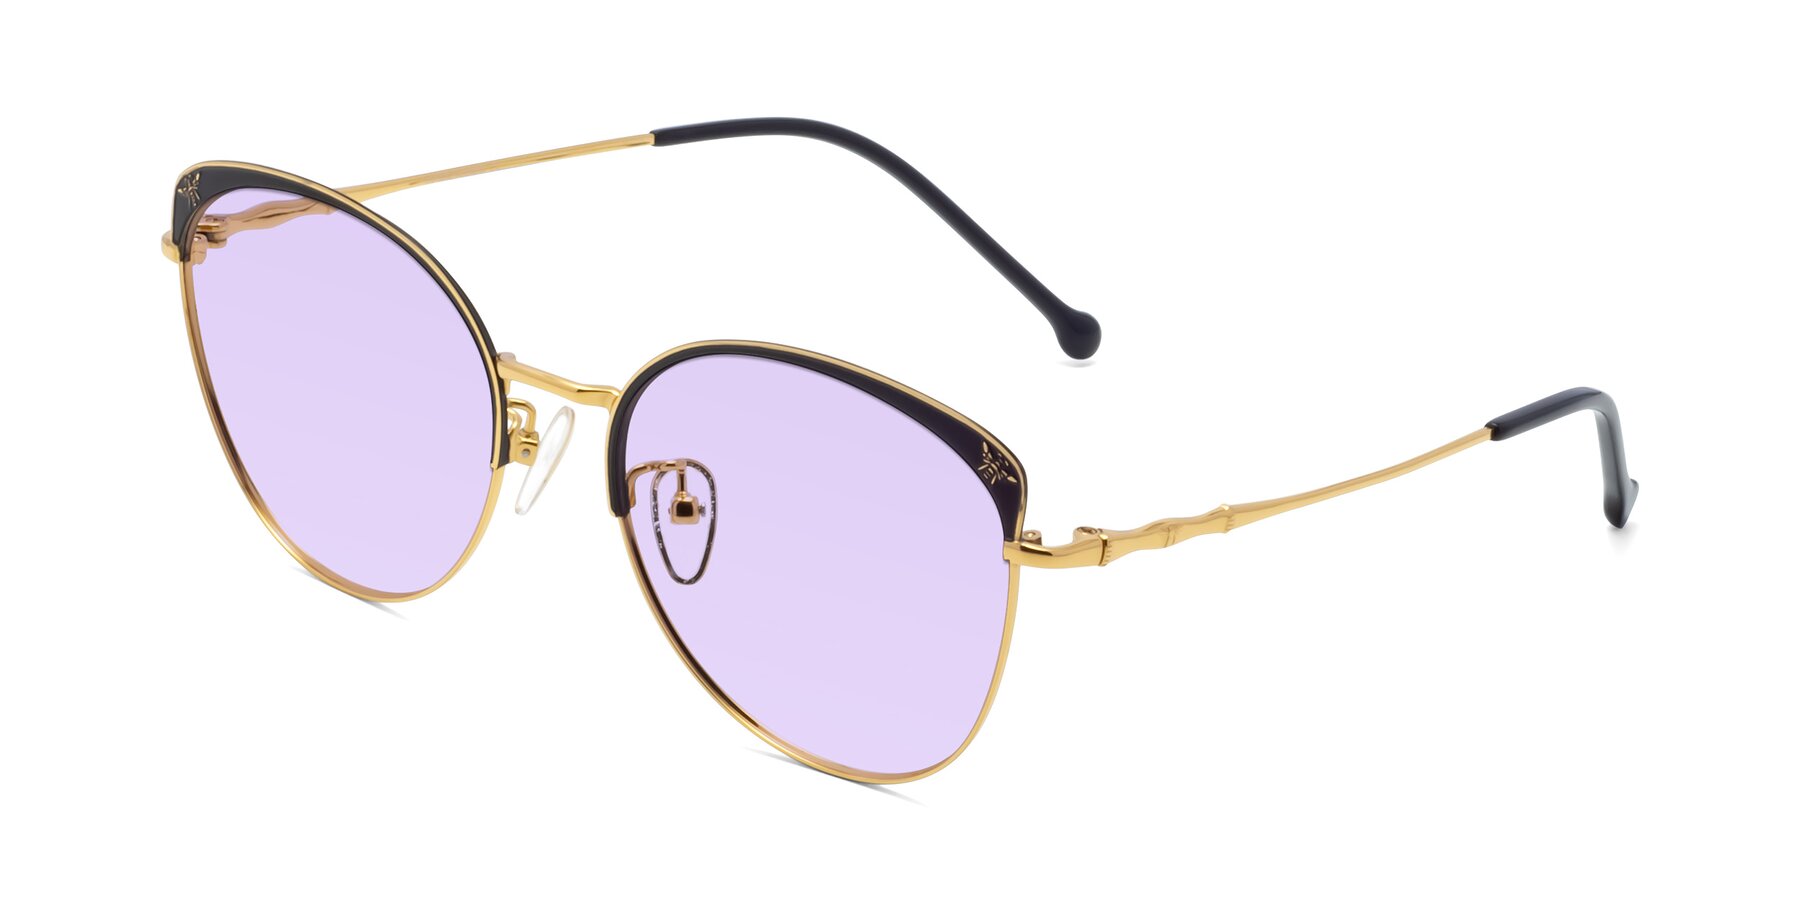 Angle of 18019 in Black-Gold with Light Purple Tinted Lenses